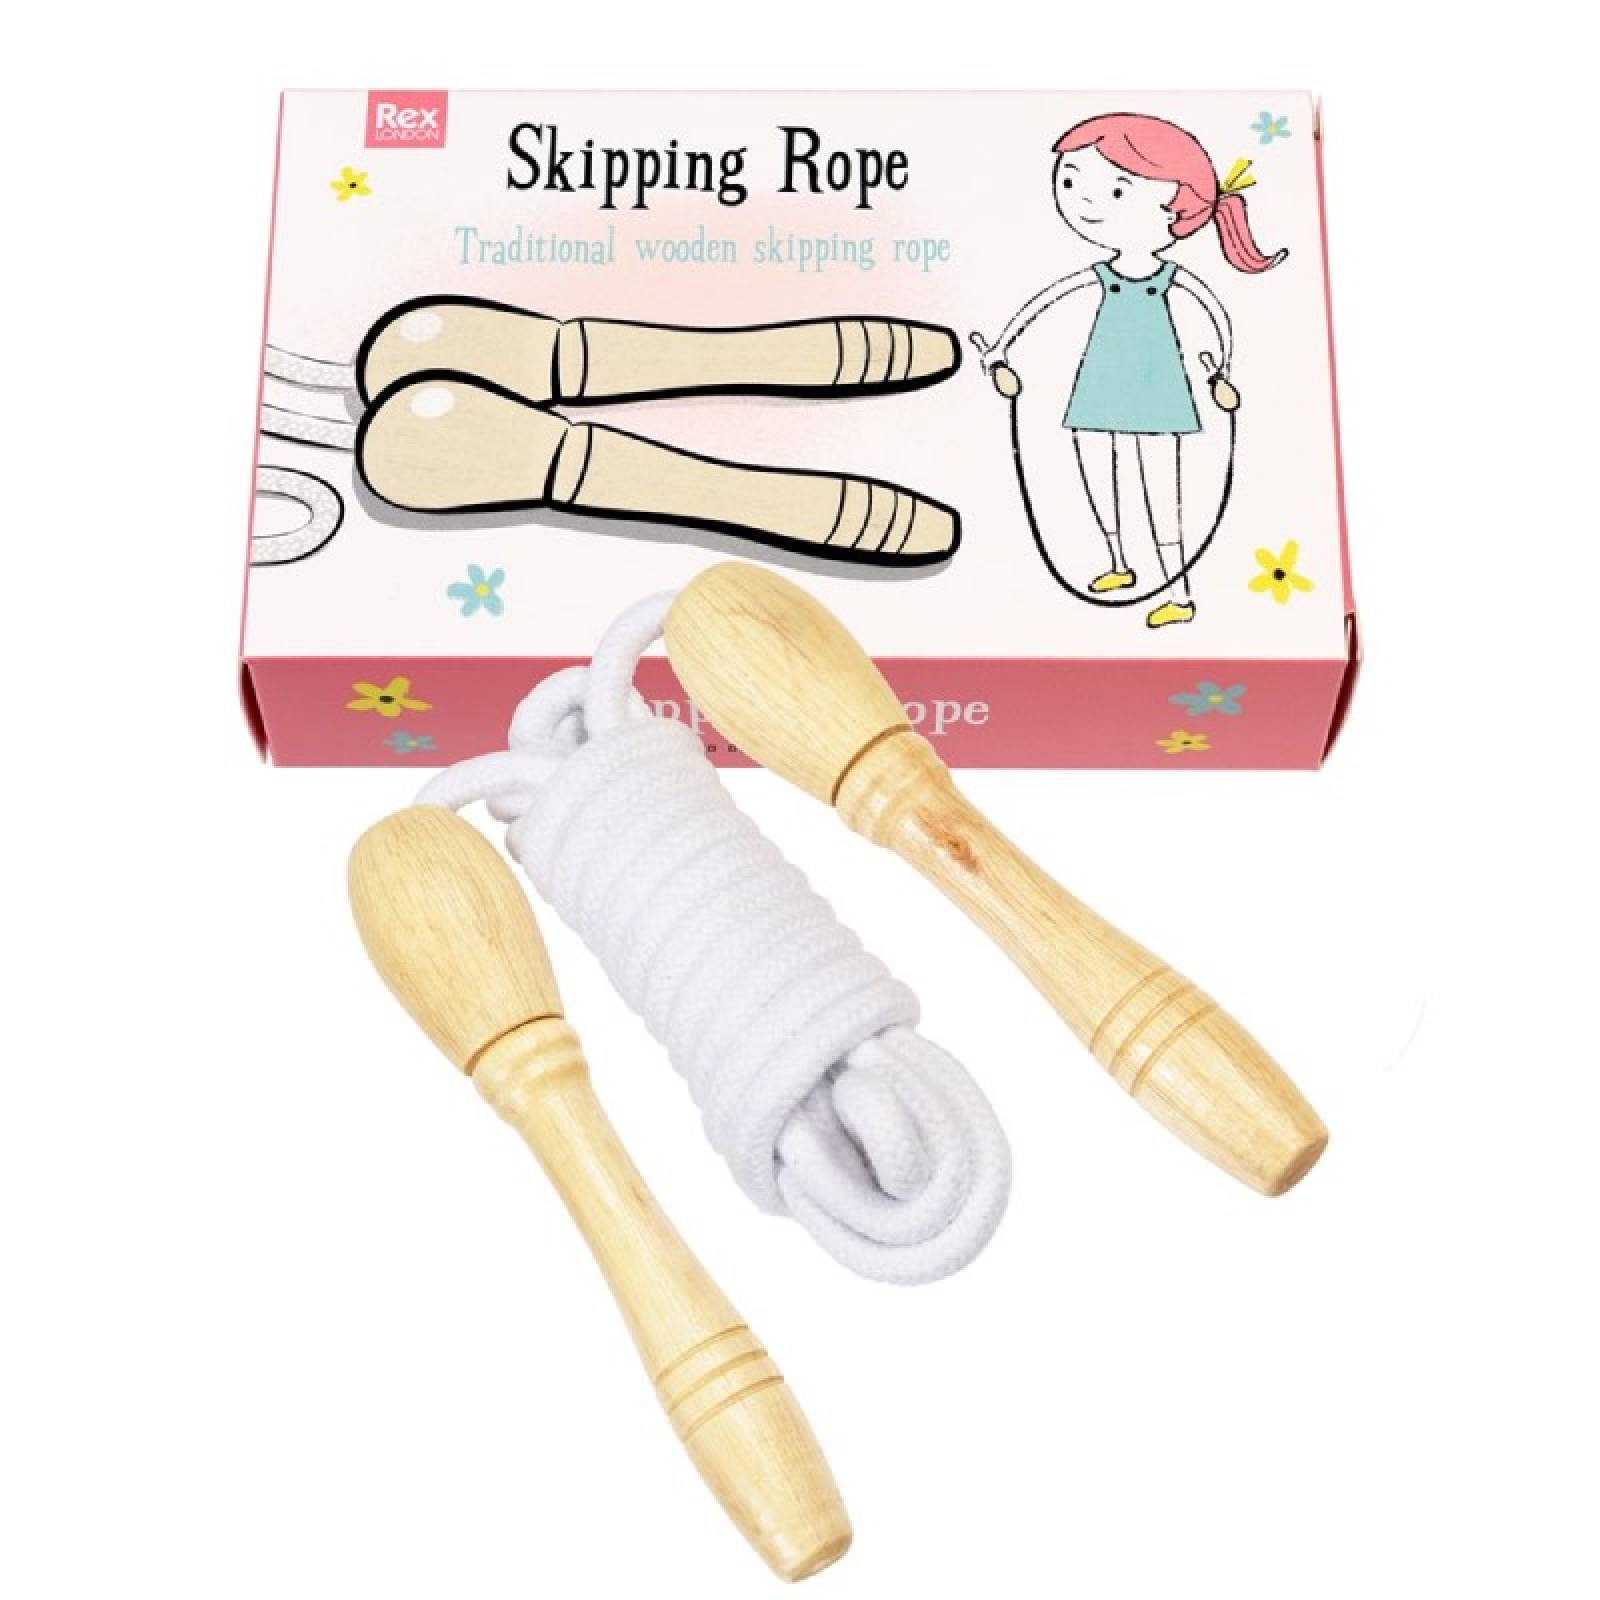 Boxed Traditional Wooden Skipping Rope thumbnails